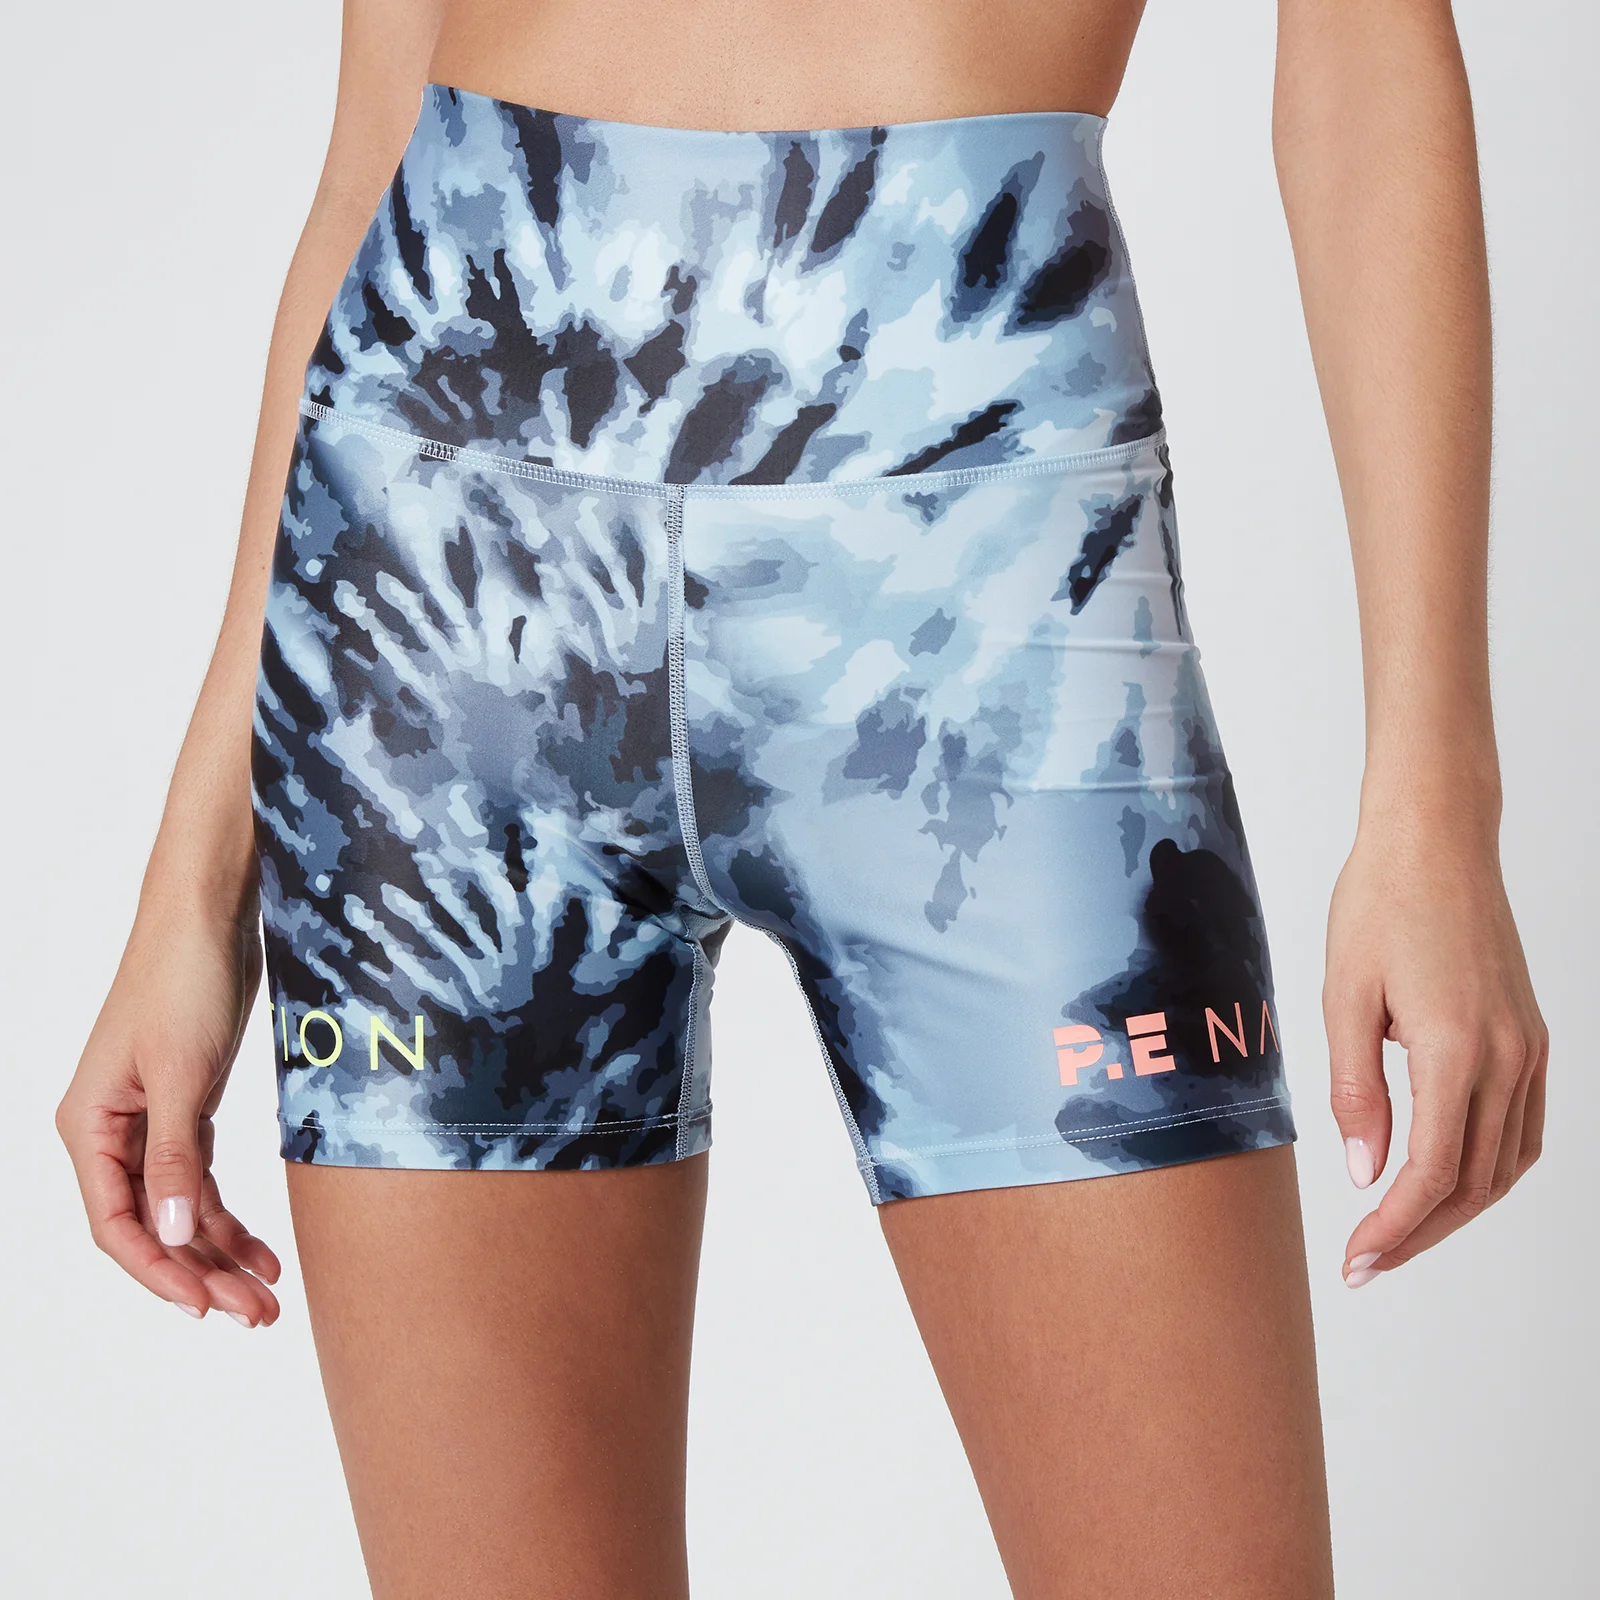 P.E Nation Women's Top Spin Shorts - Print Image 1